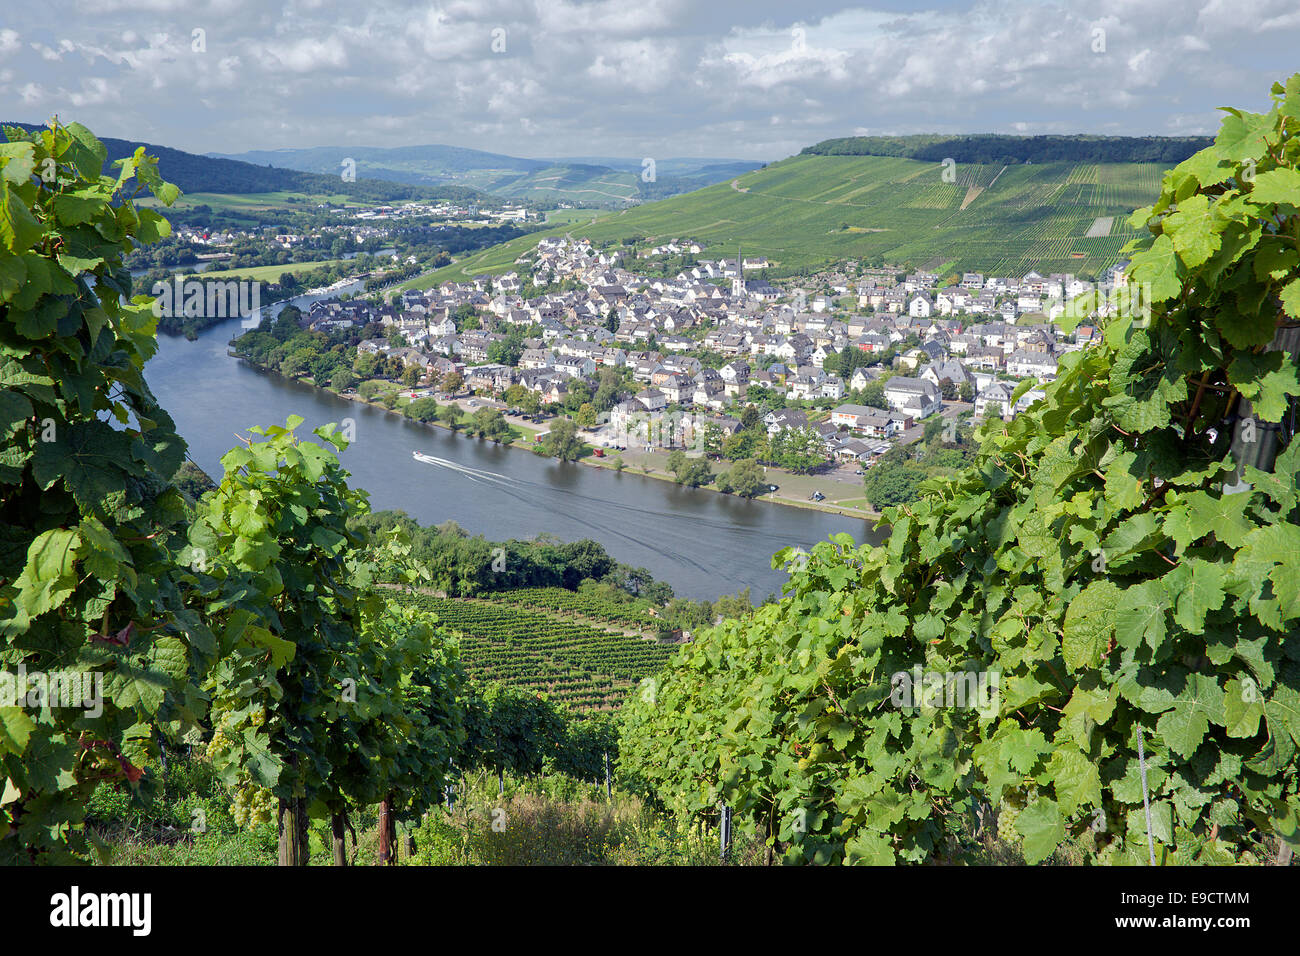 Vineyard and Moselle River Bernkastel-Kues Moselle Valley Germany Stock Photo